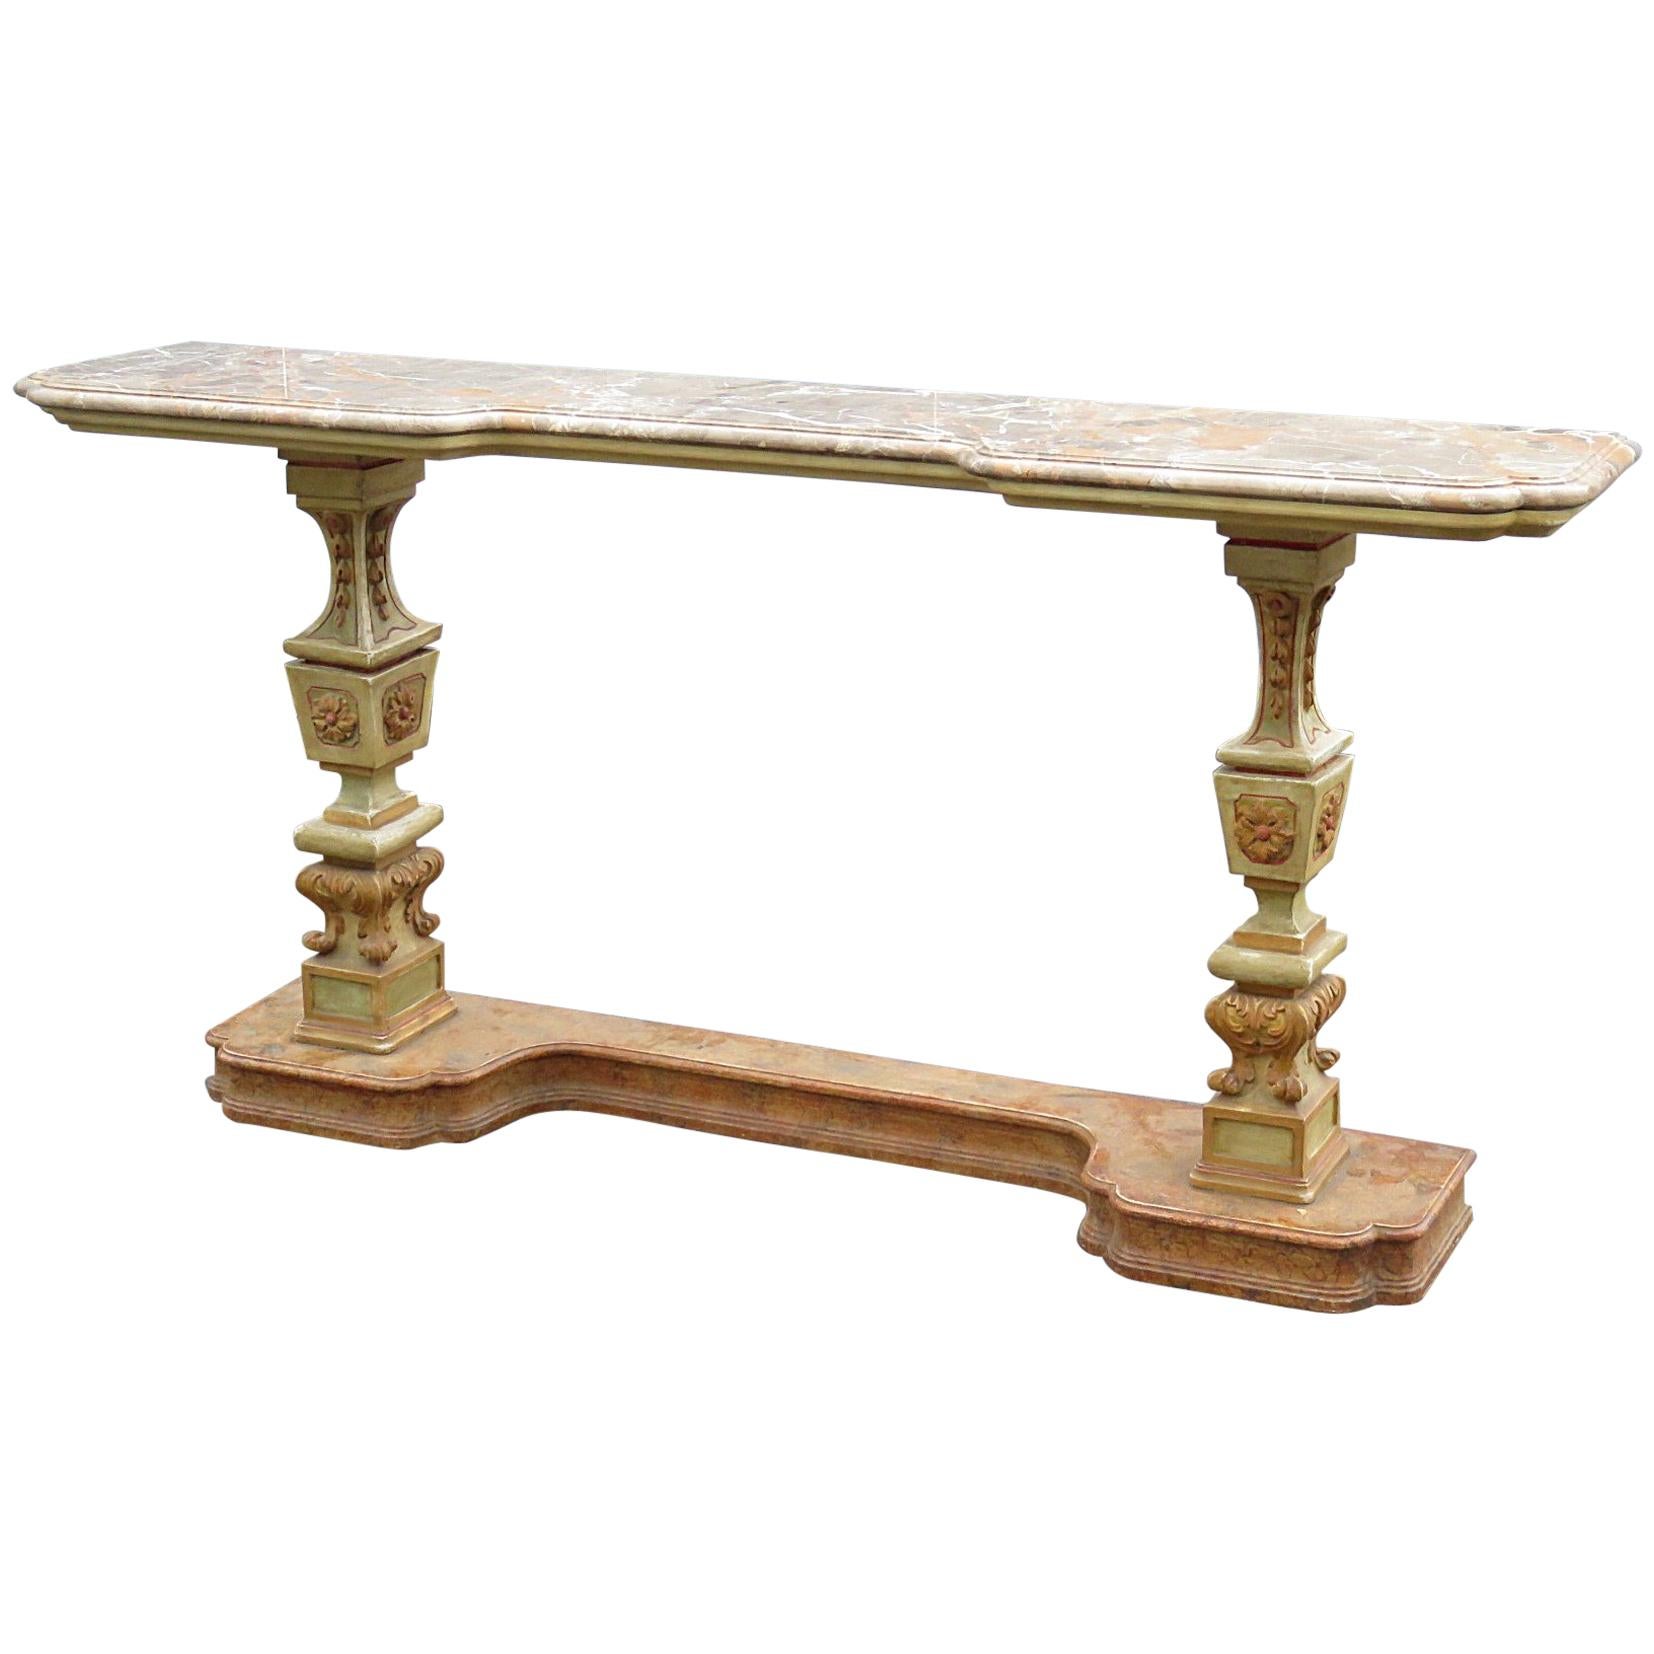 Italian Florentine Style Carved Painted Console Table with Marble Top C 1920s